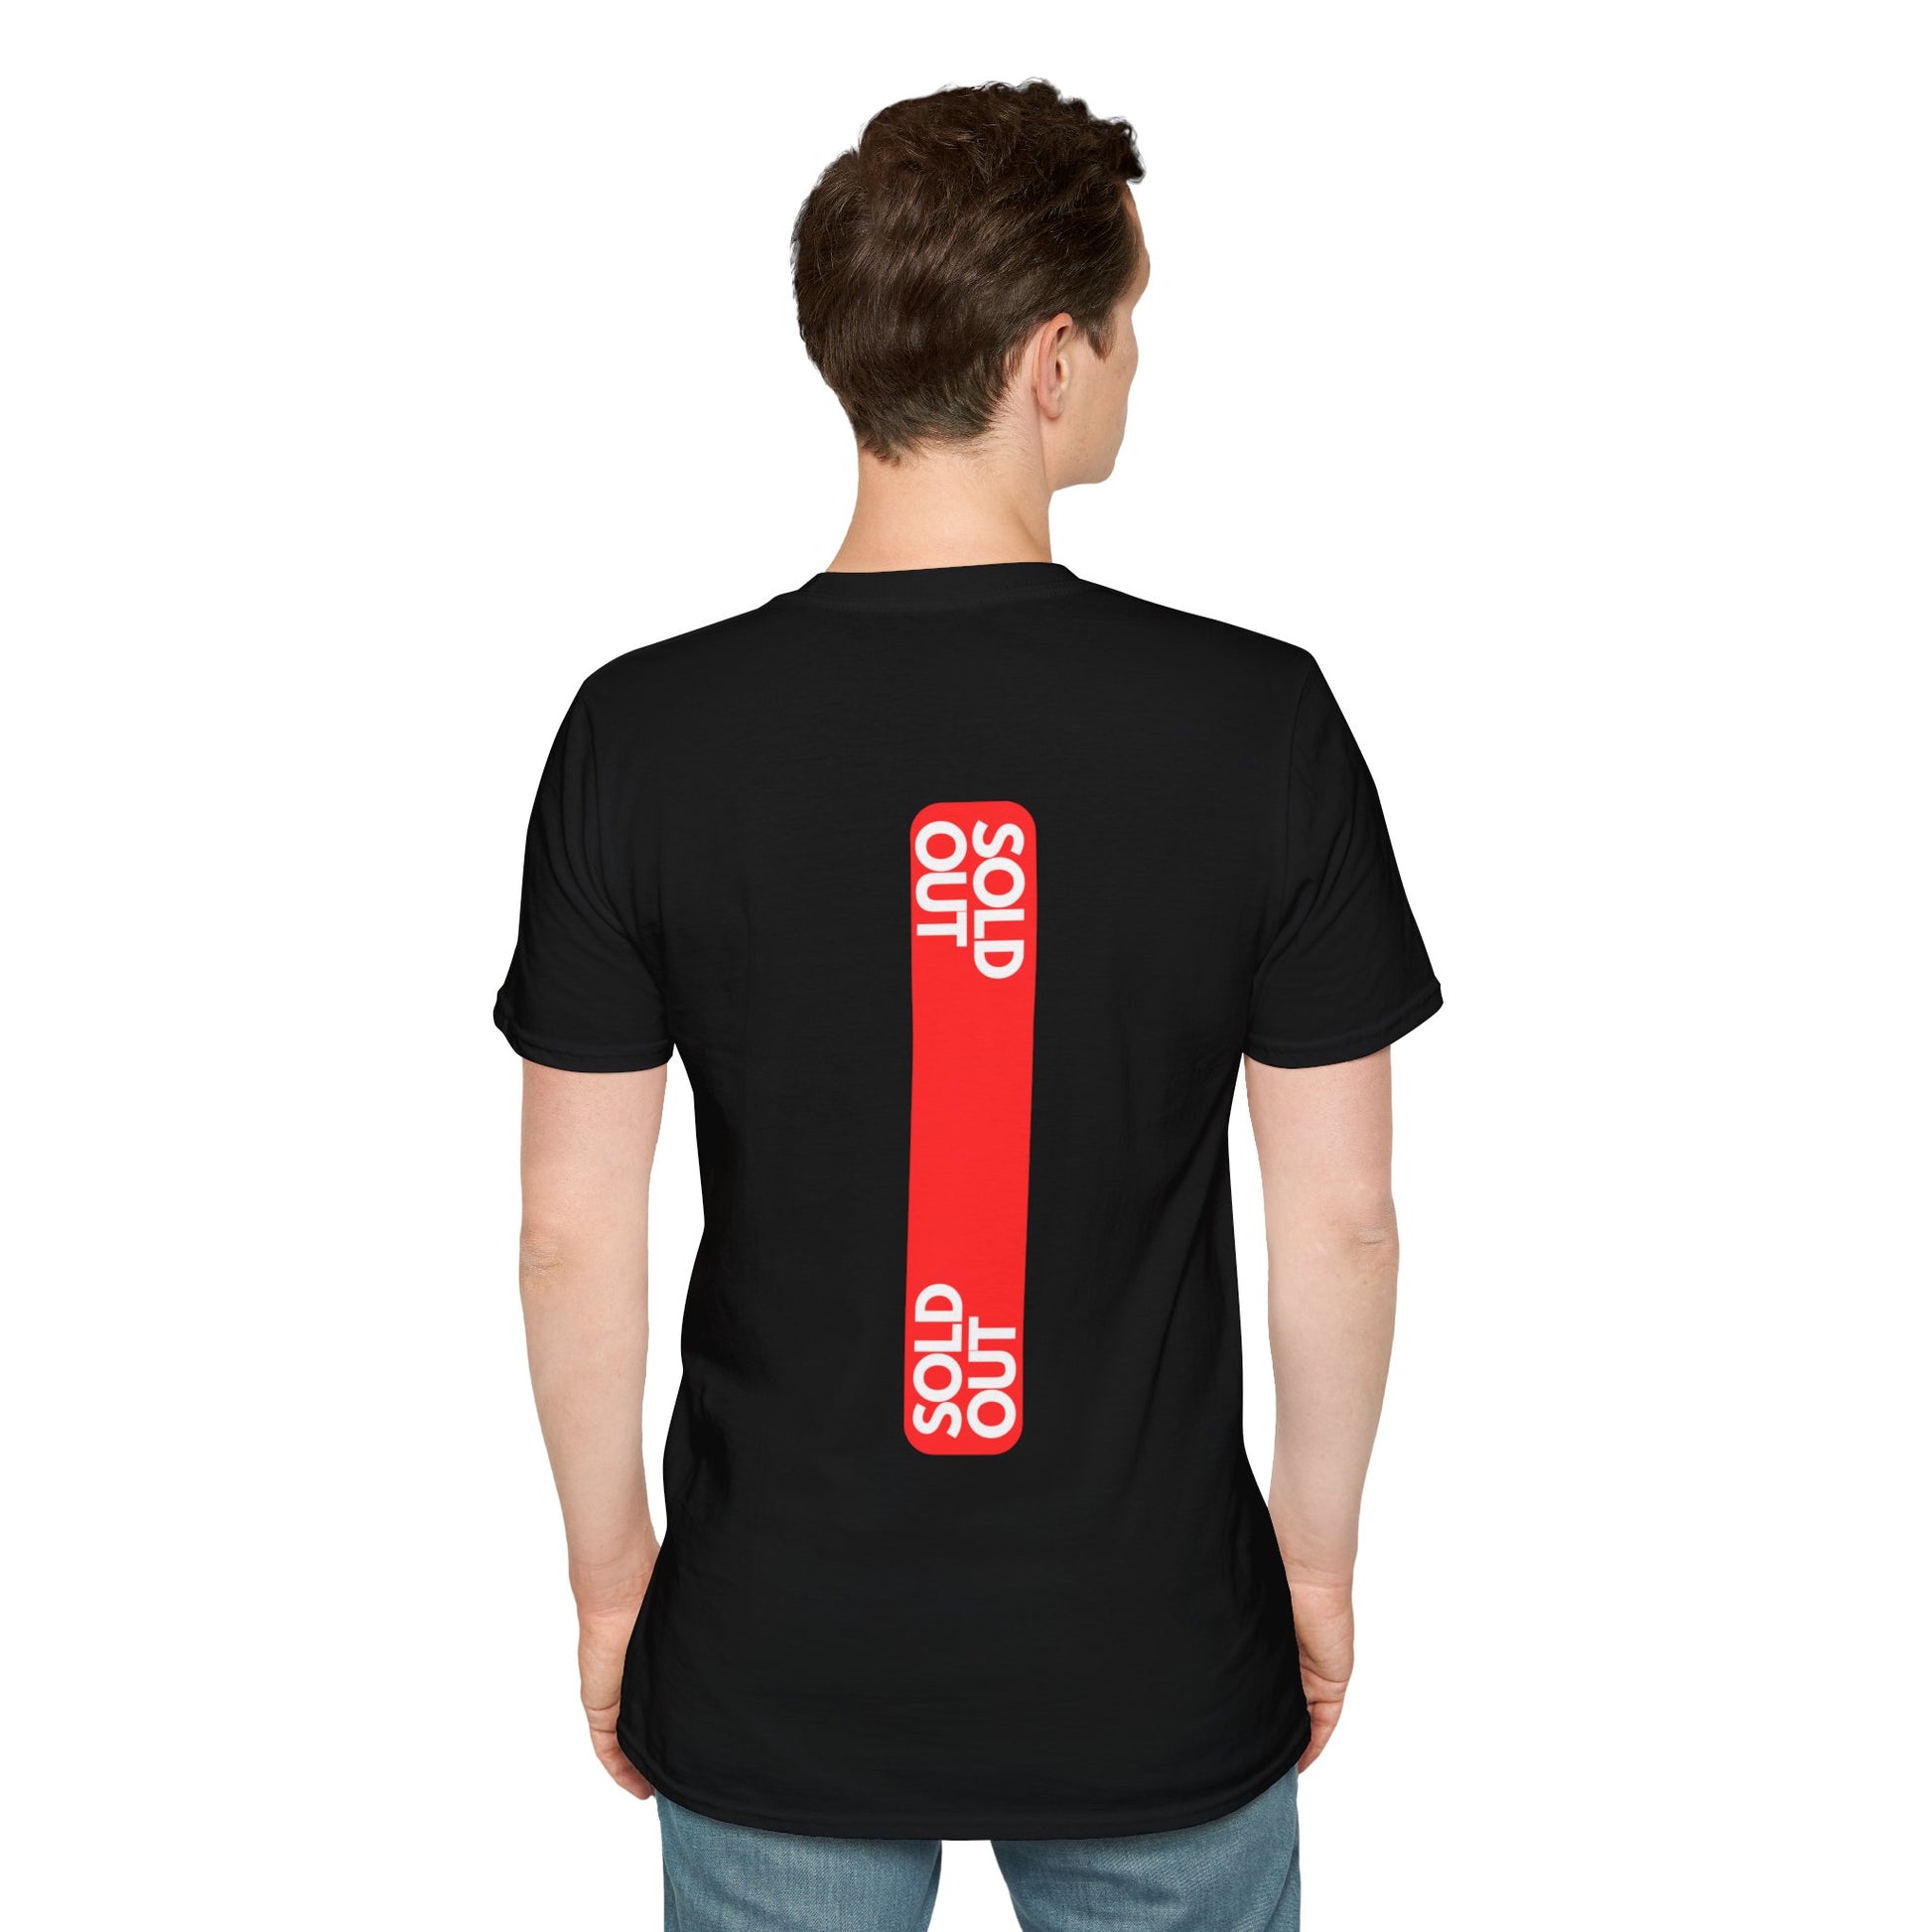 Black T-shirt with a striking red tag design and the text ‘SOLD OUT’ in bold letters